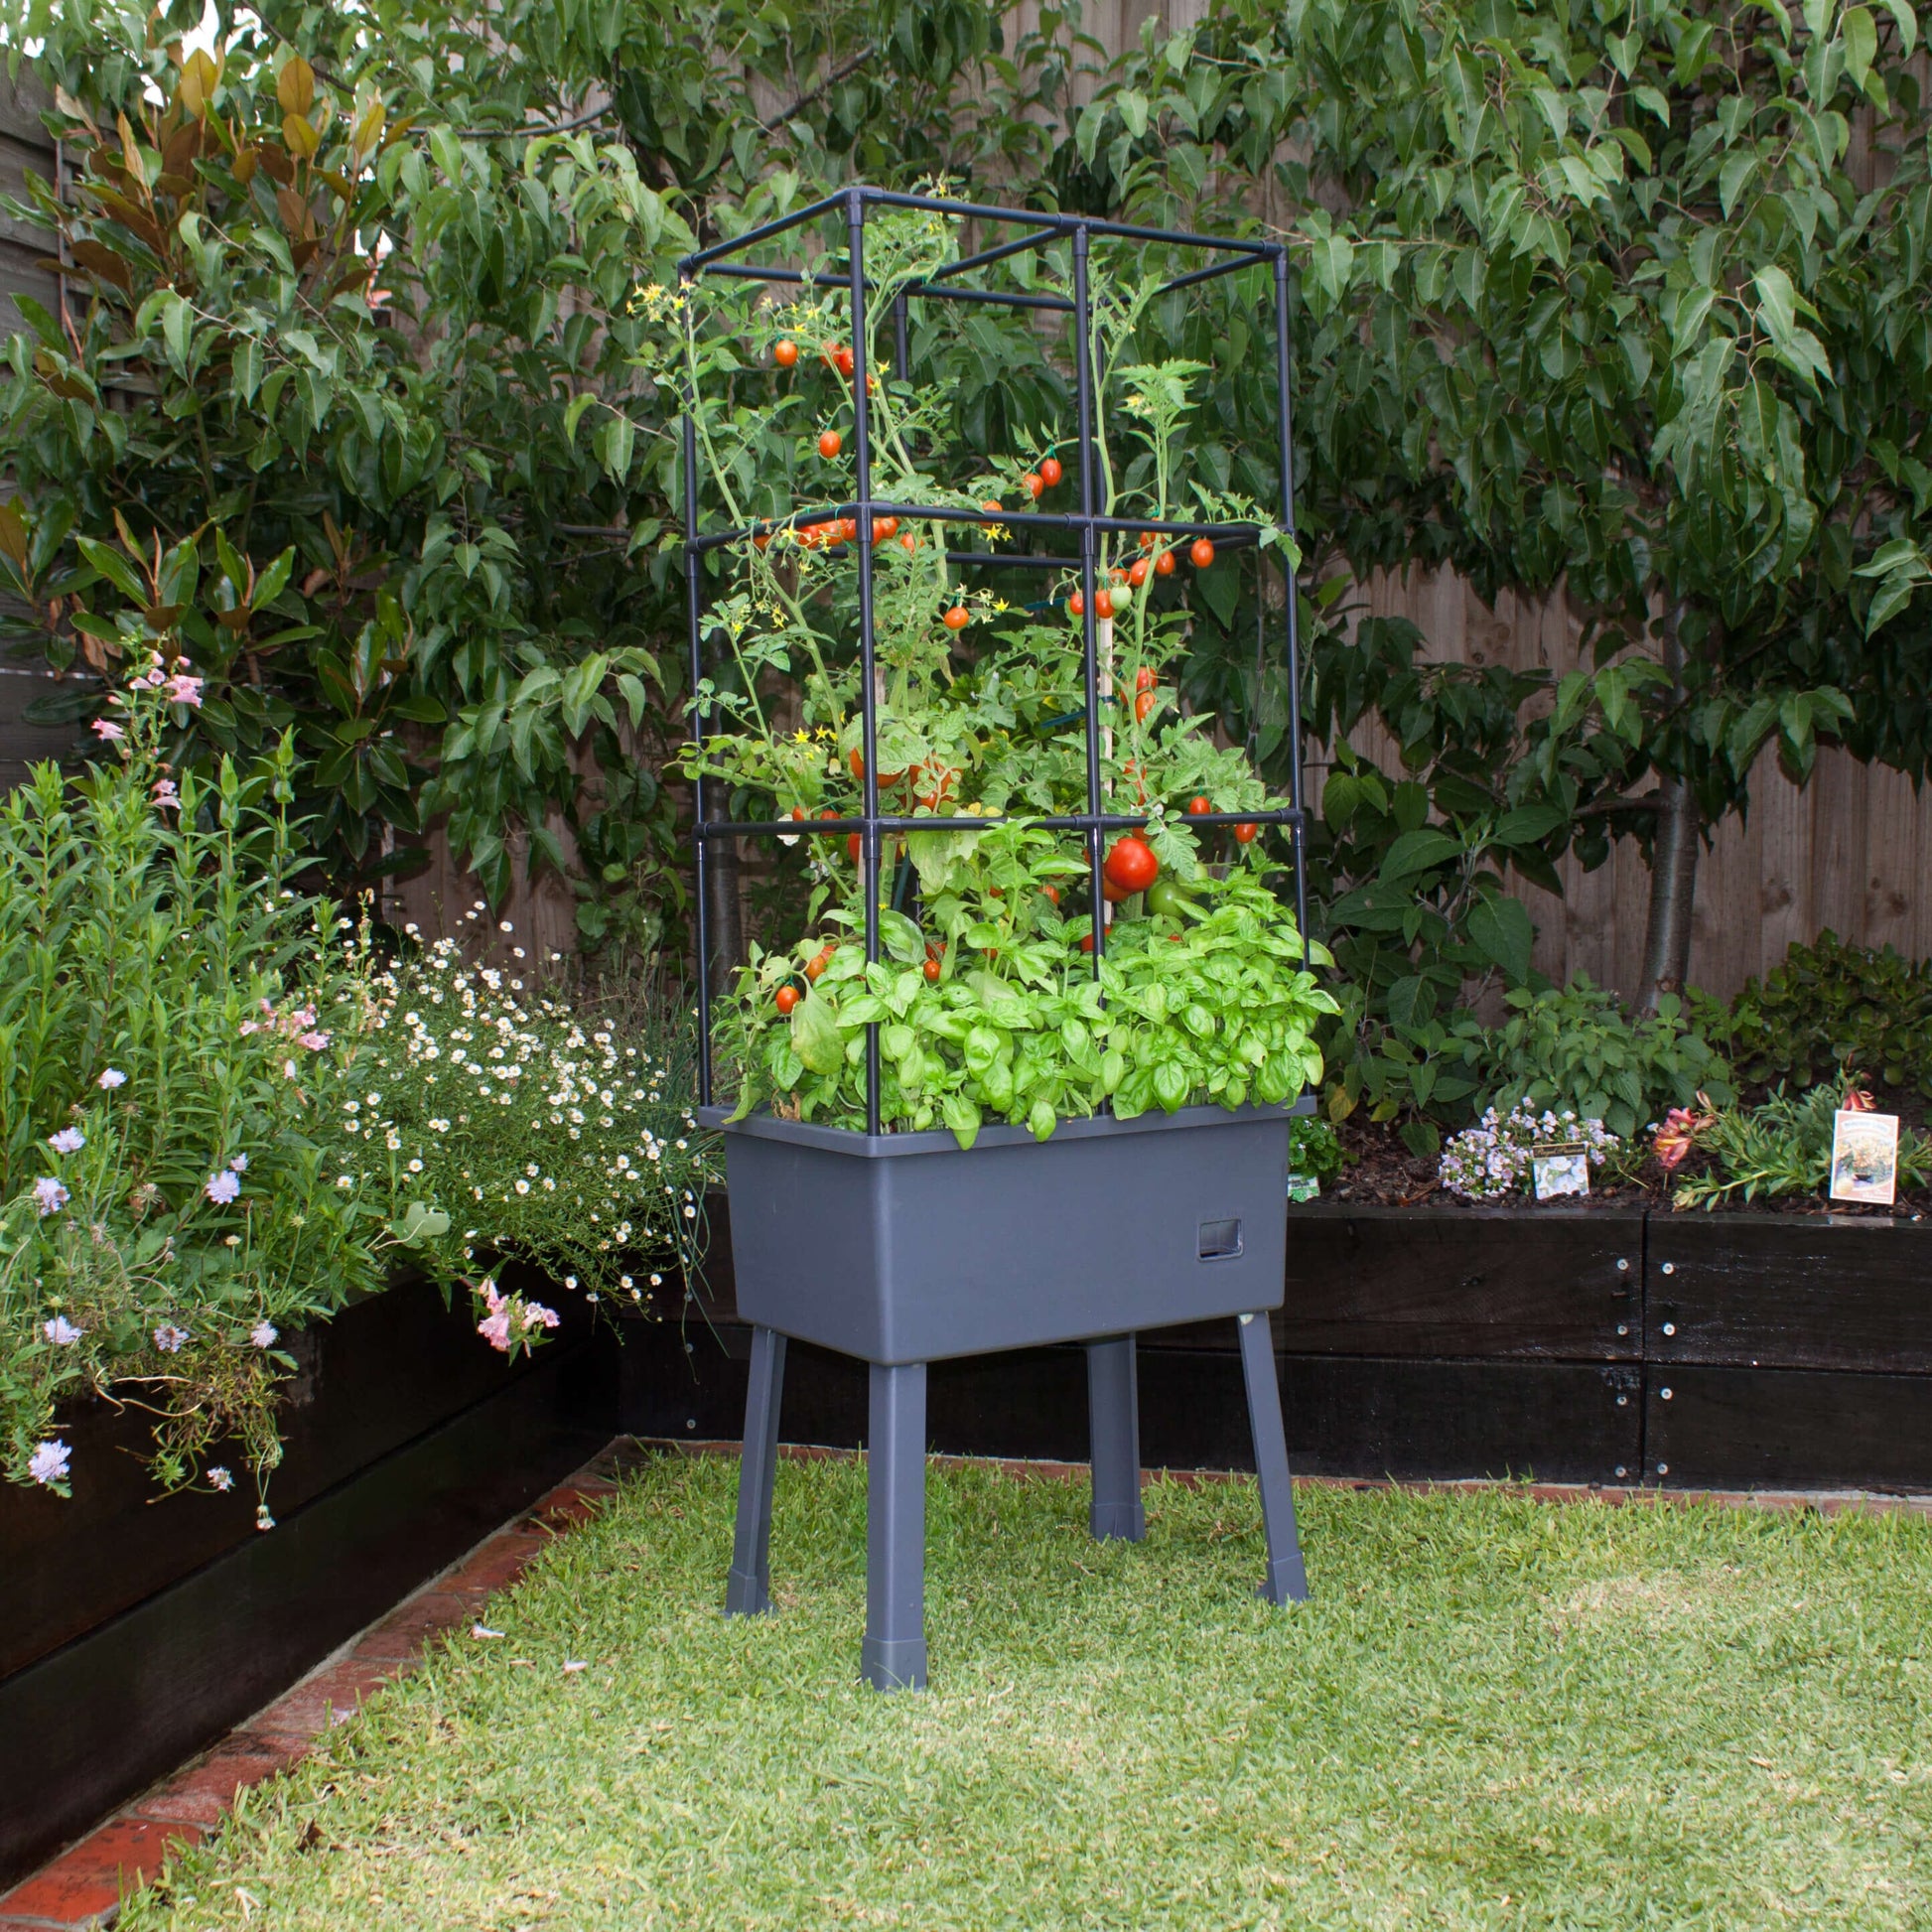 Self-Watering 15.75" x 23.5" x 57" Elevated Planter w/ Trellis Frame and Greenhouse Cover Patio Planters Frame It All 